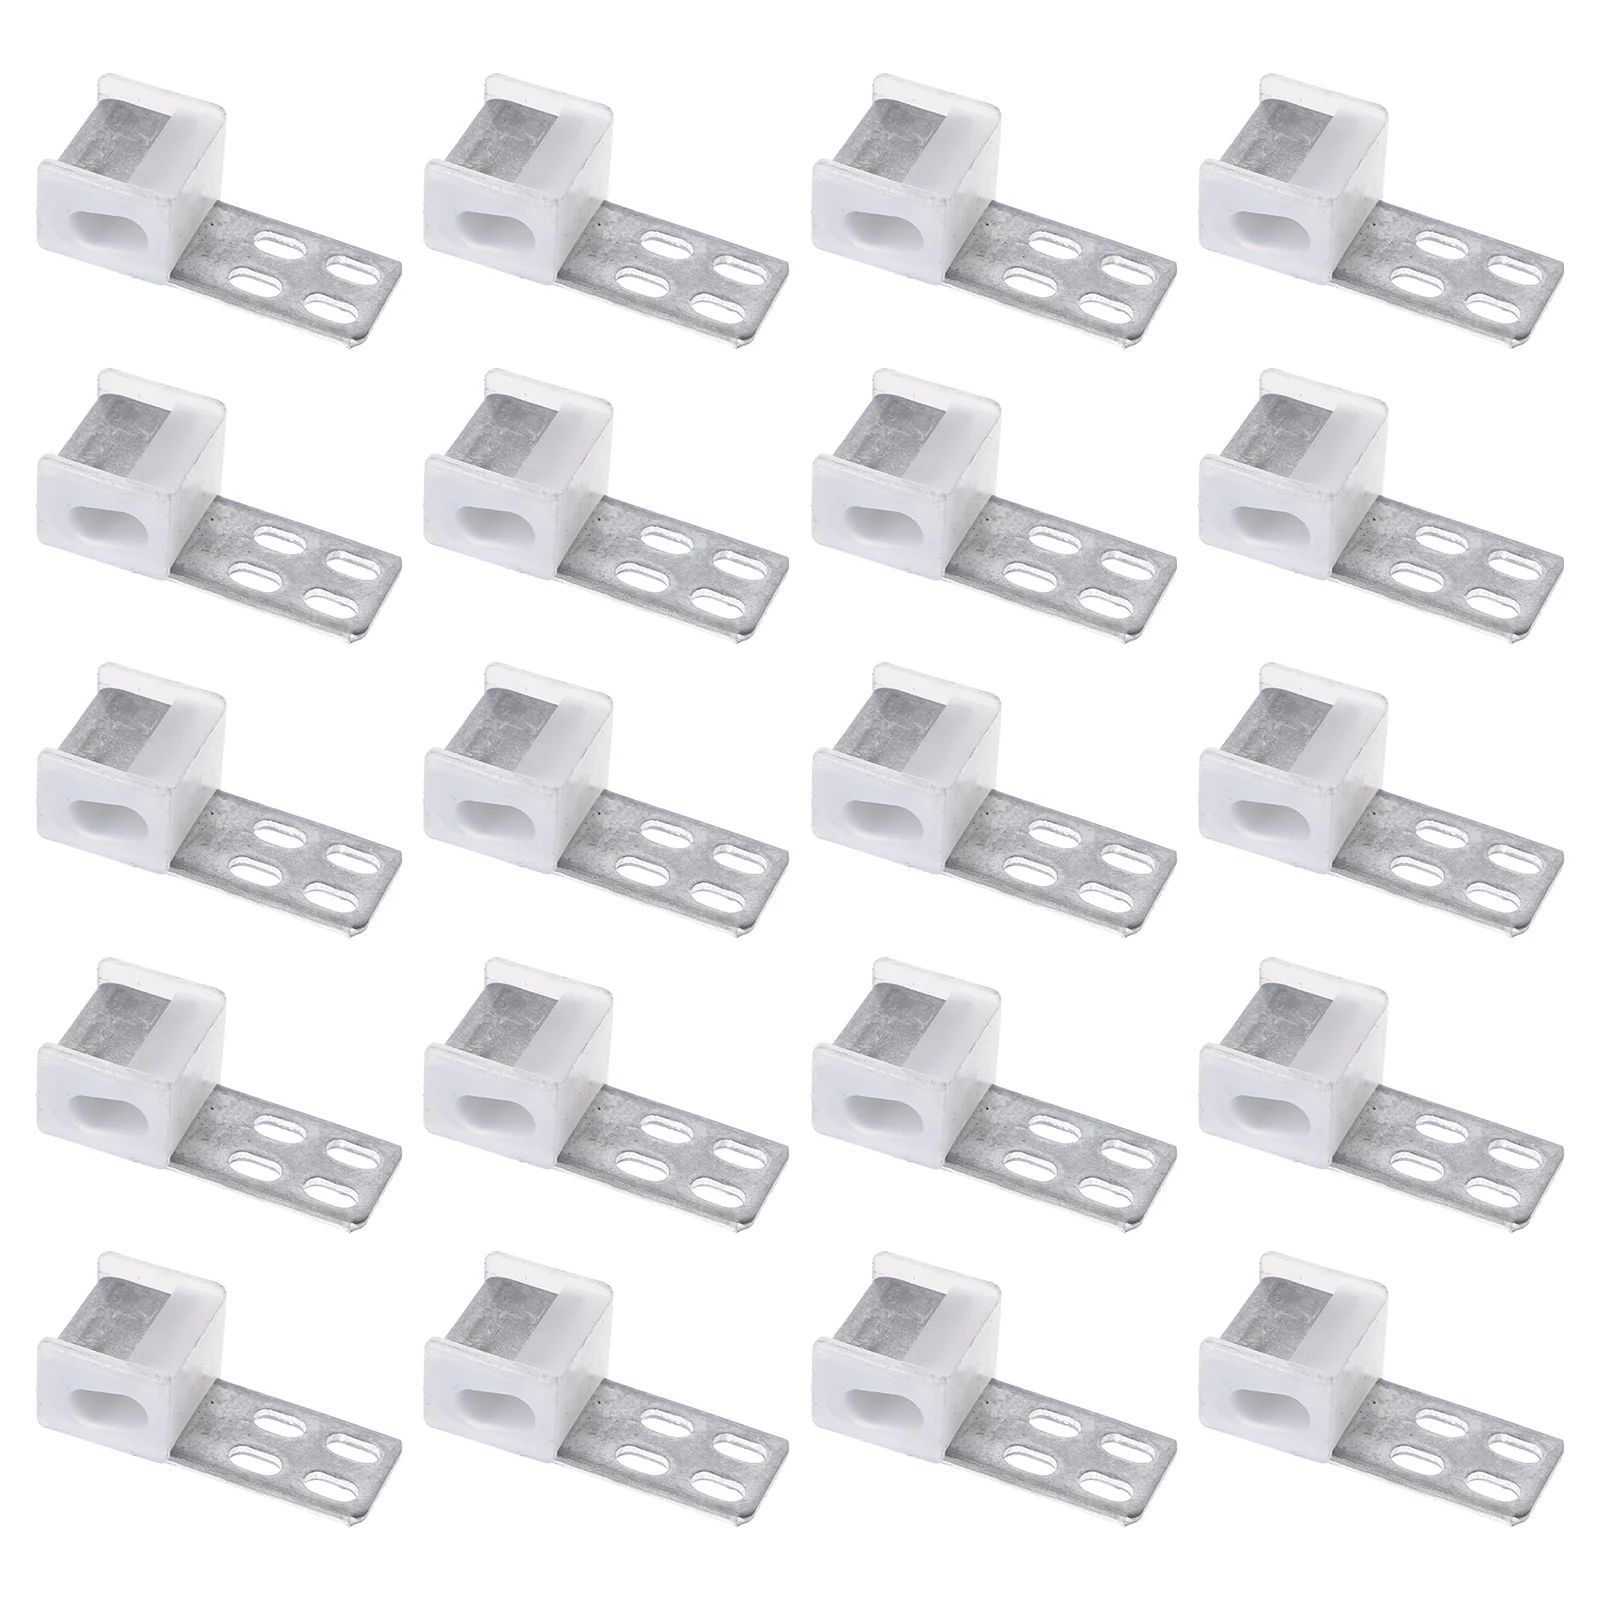 

20pcs Couch Supports For Sagging Cushions Spring Buckle Spring Furniture Repair Kit Couch Spring Repair Accessories Chair Clips